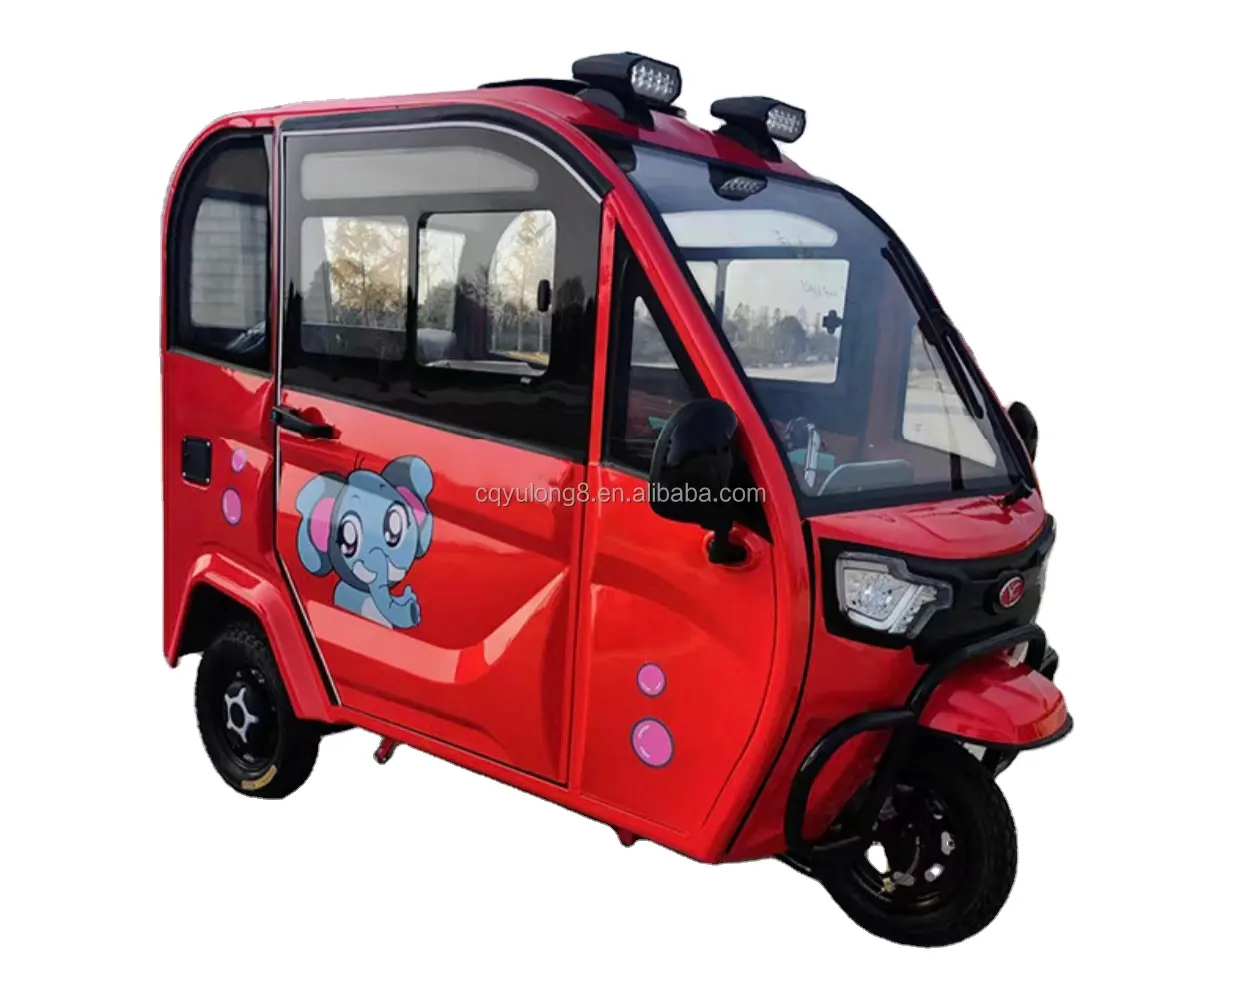 Free driving large space enclosed cabin electric tricycle